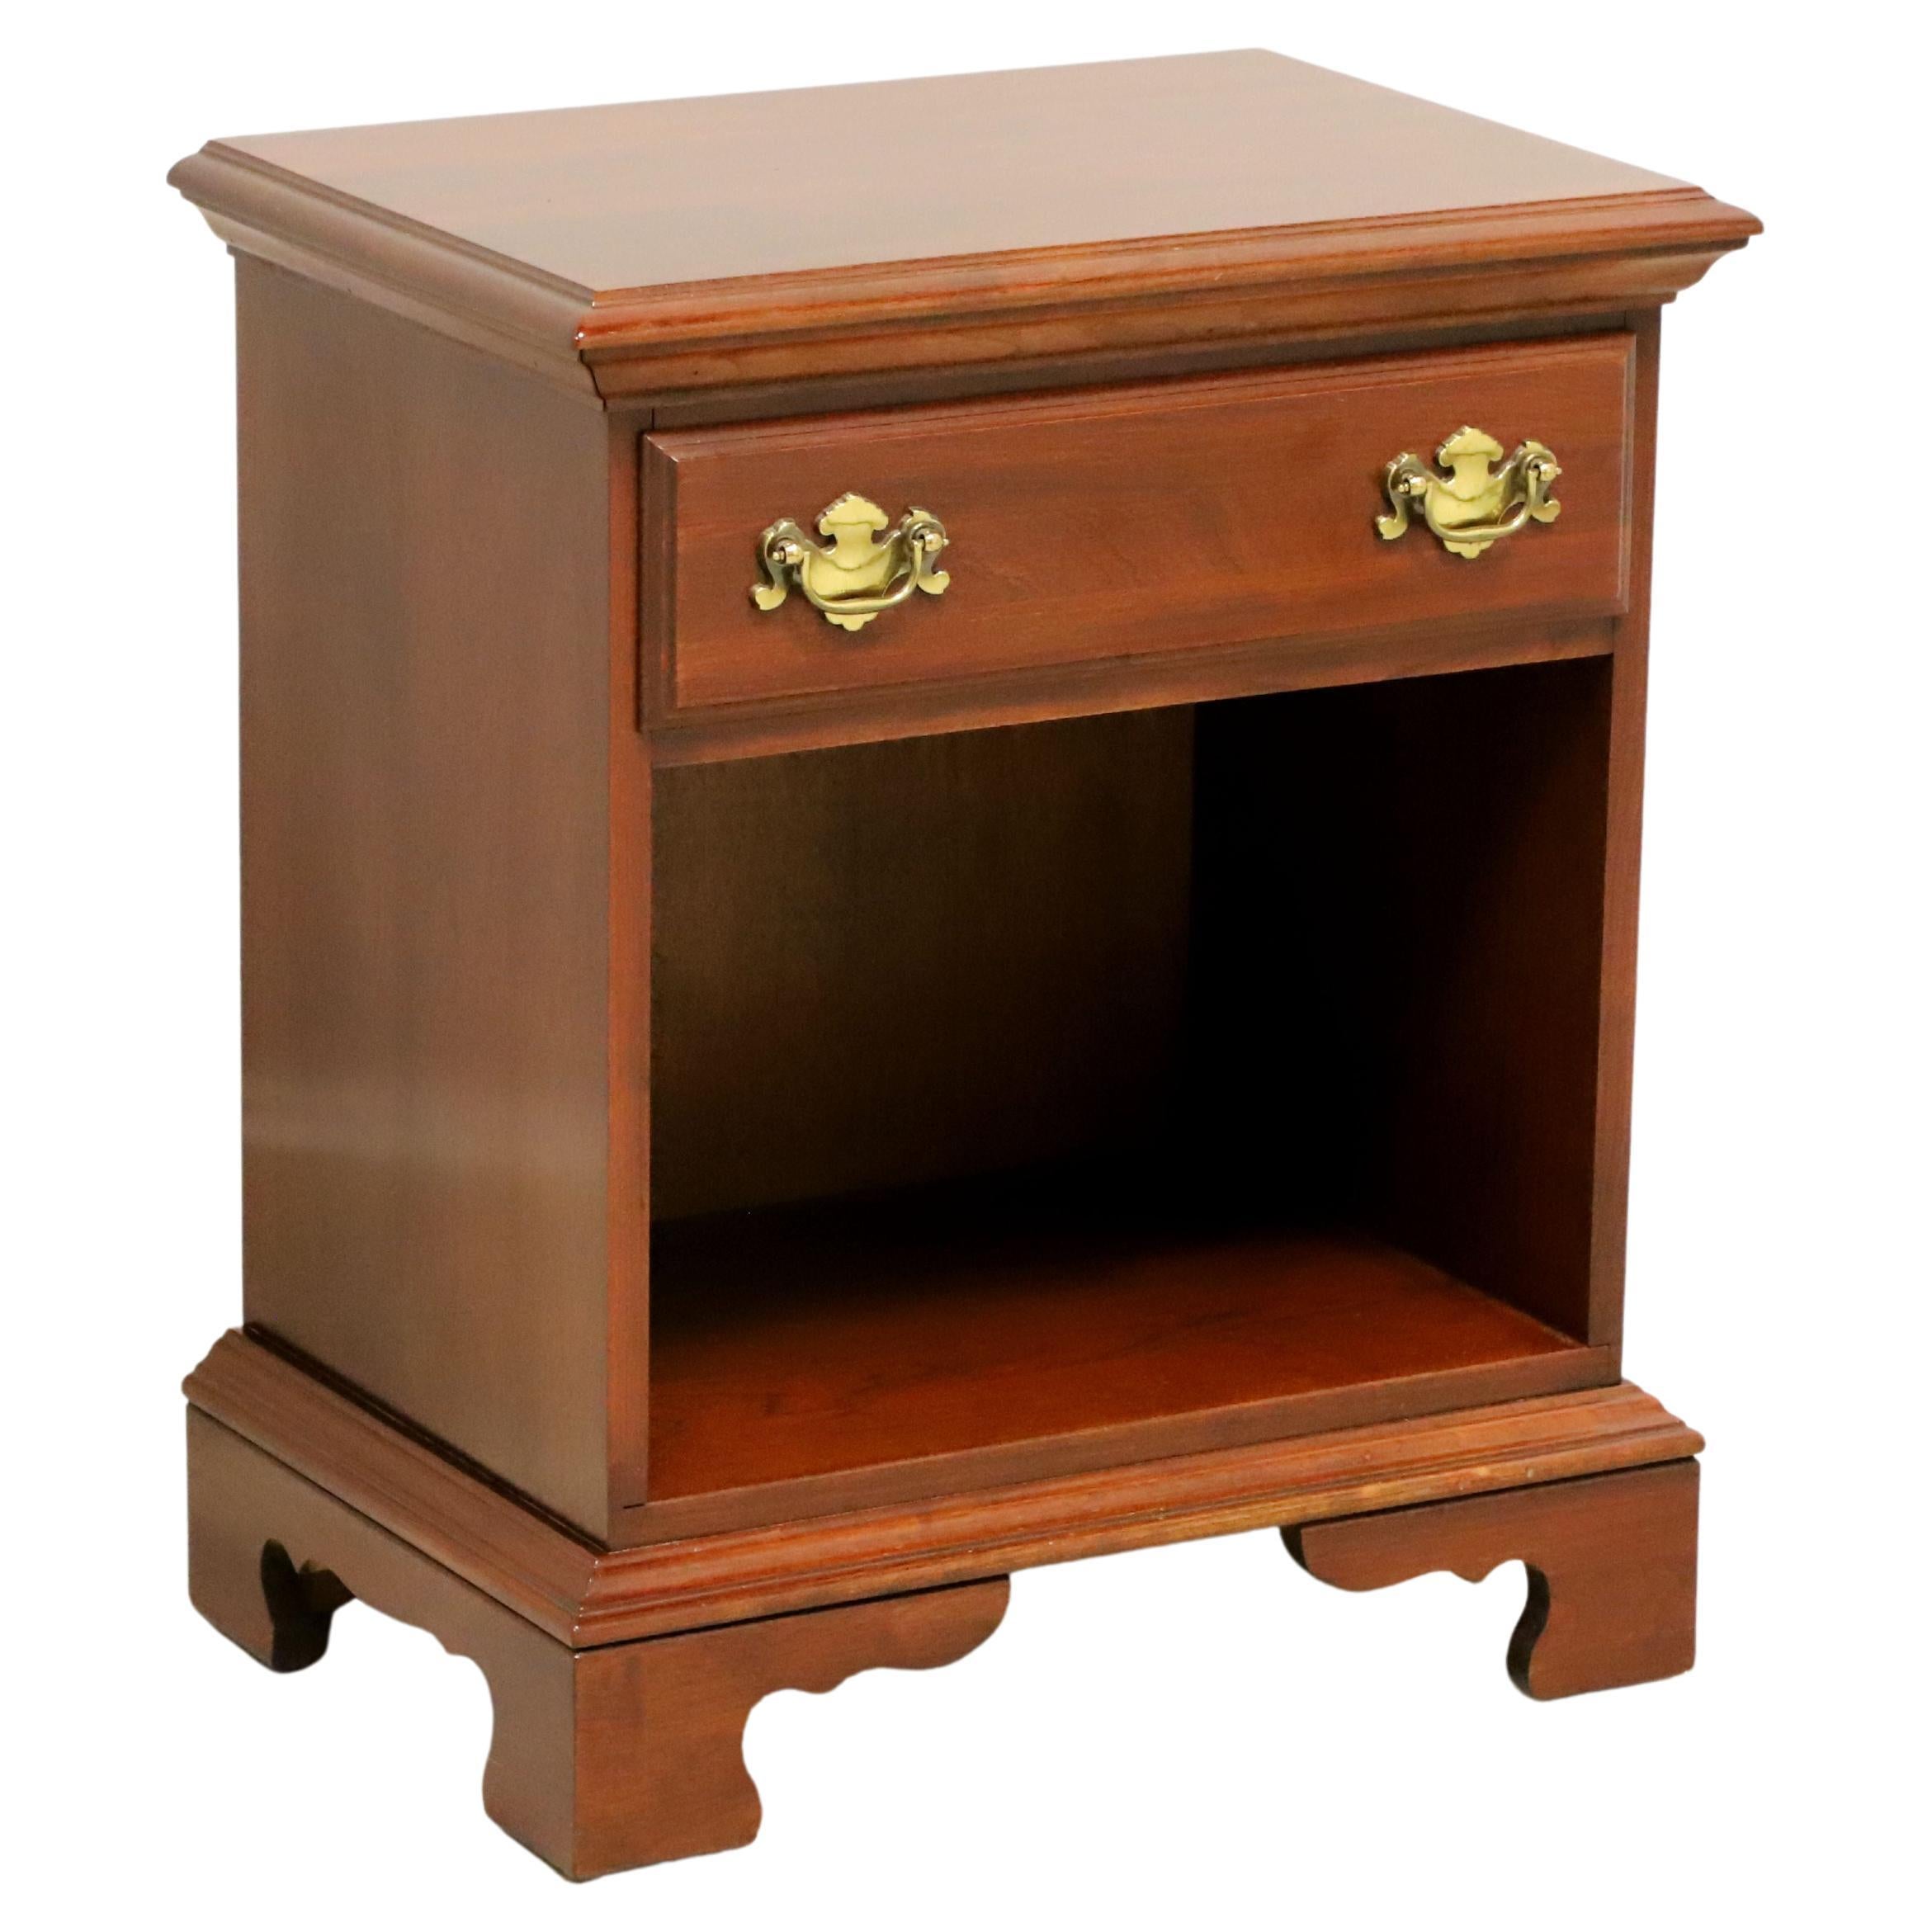 JAMESTOWN STERLING Cherry Chippendale One-Drawer Nightstand Bedside Chest